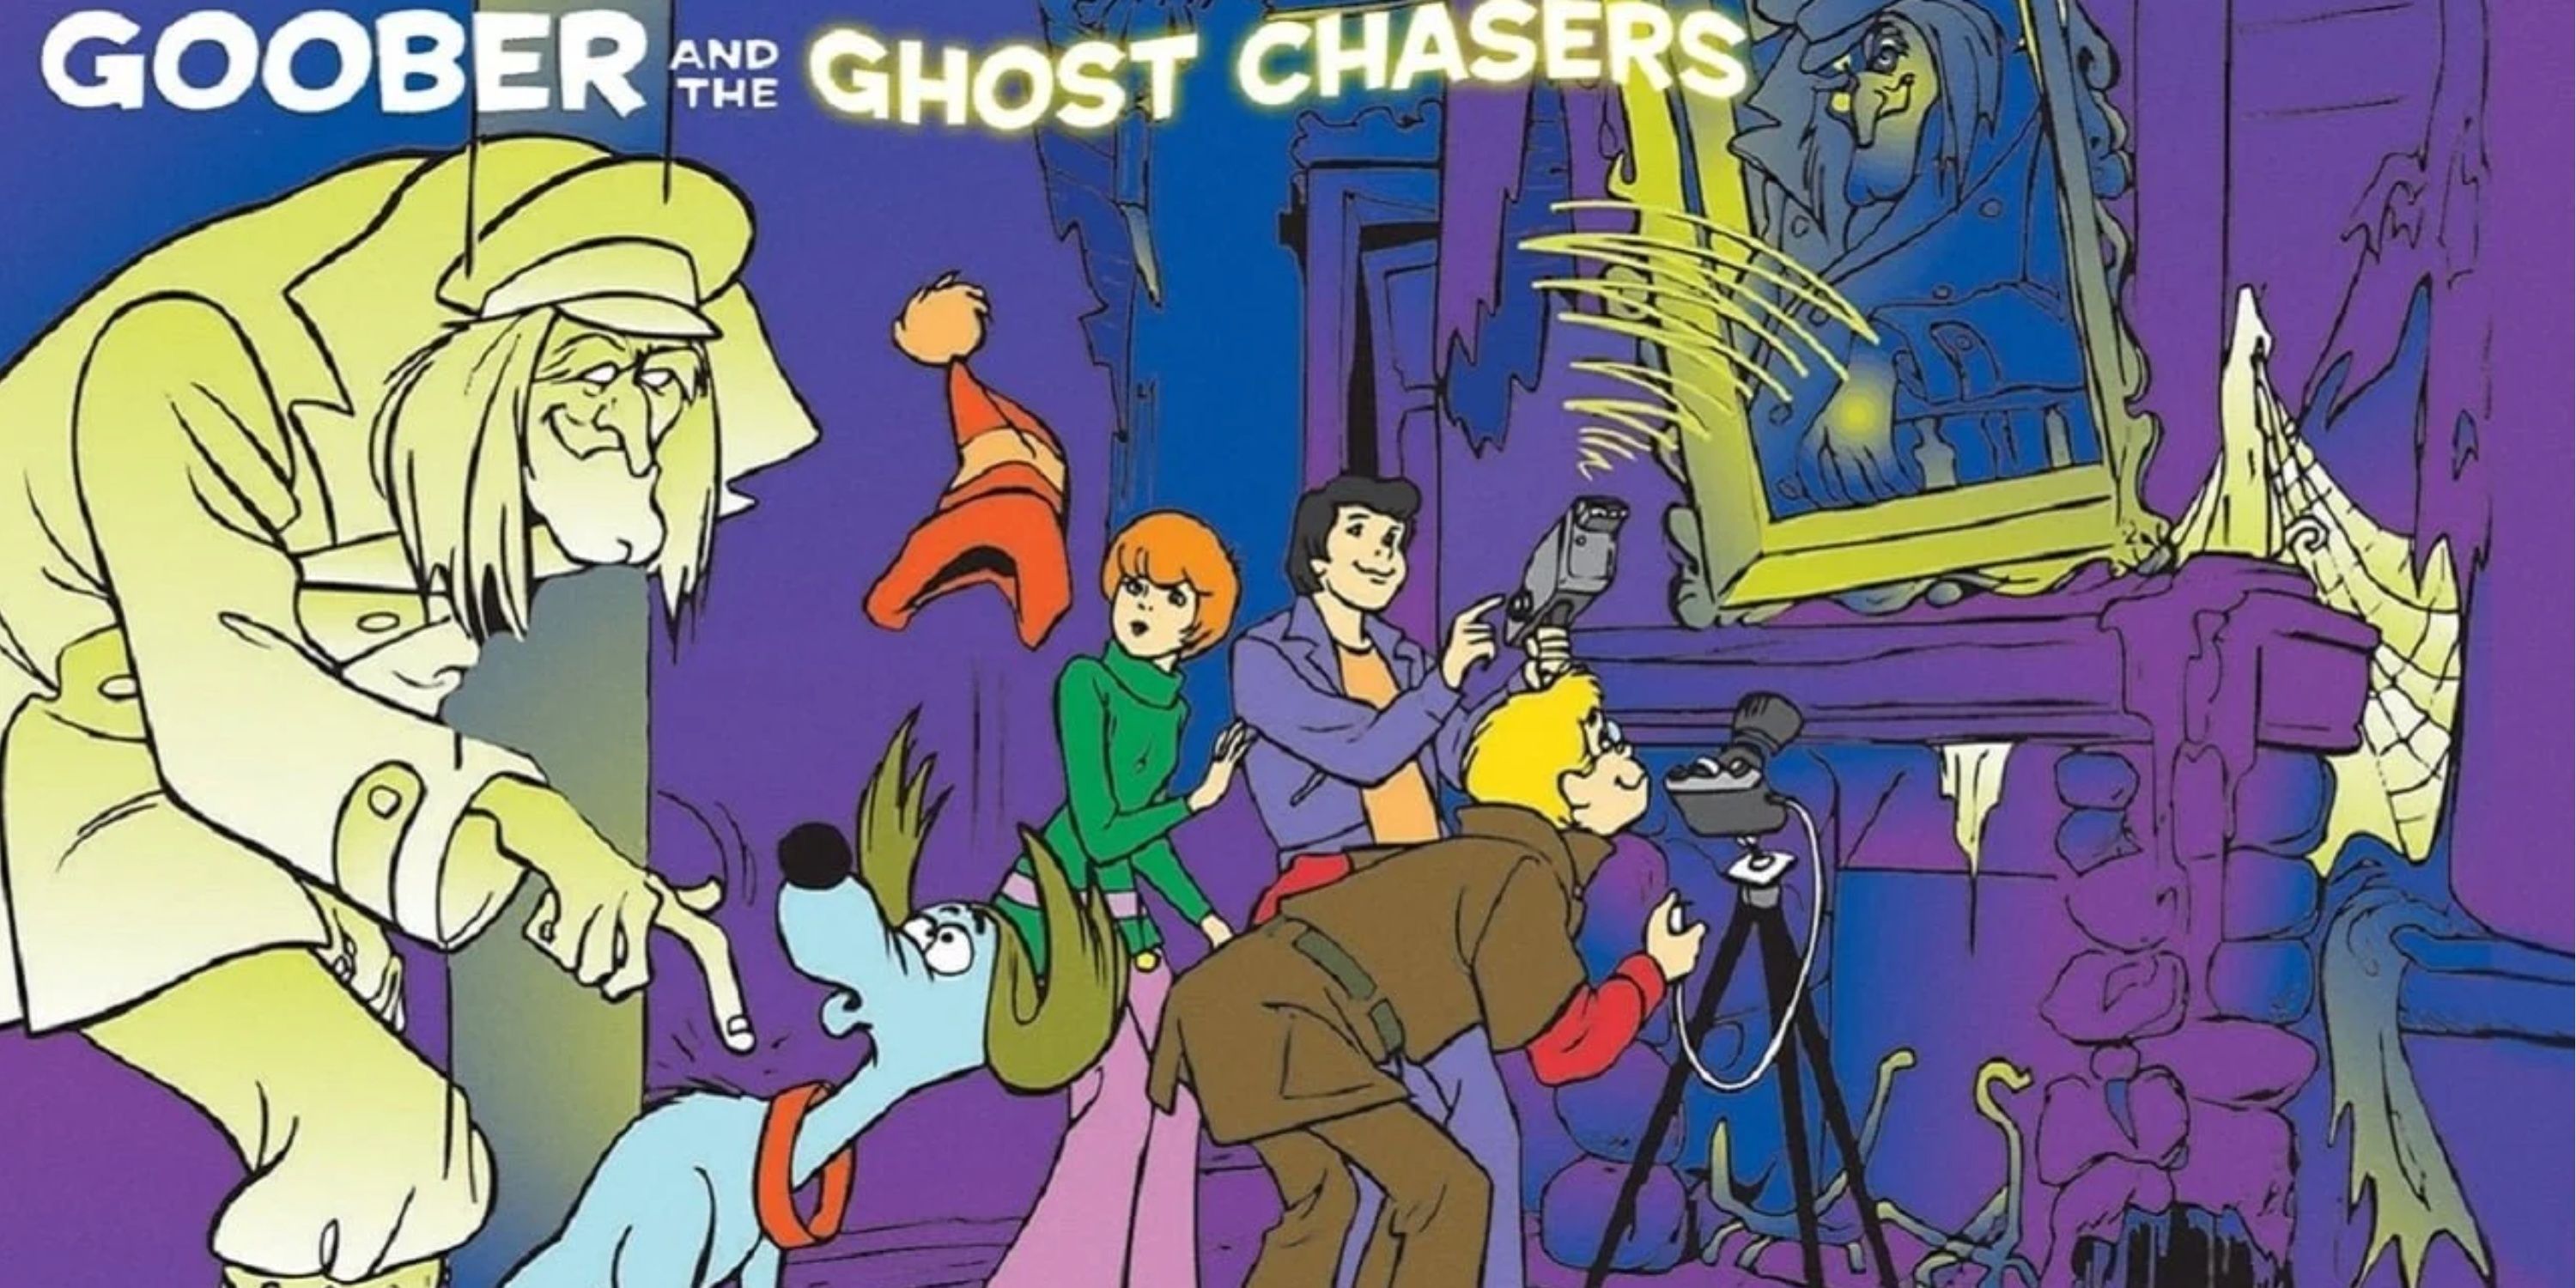 Goober and the Ghost Chasers in a haunted mansion